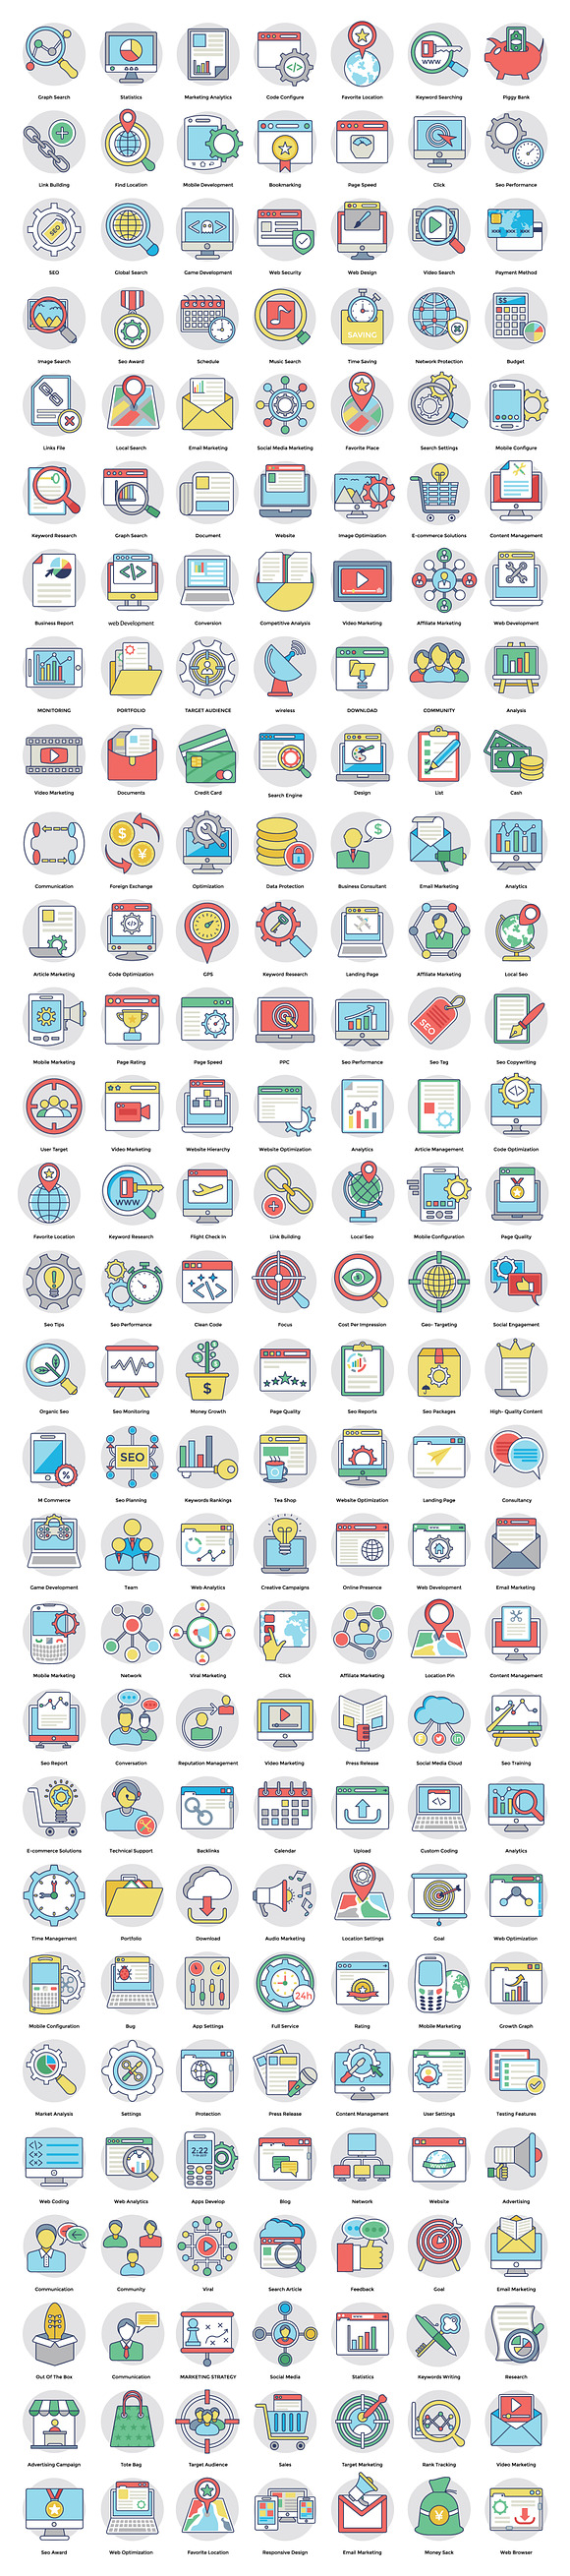 203 Digital Marketing Icons in Graphics - product preview 1